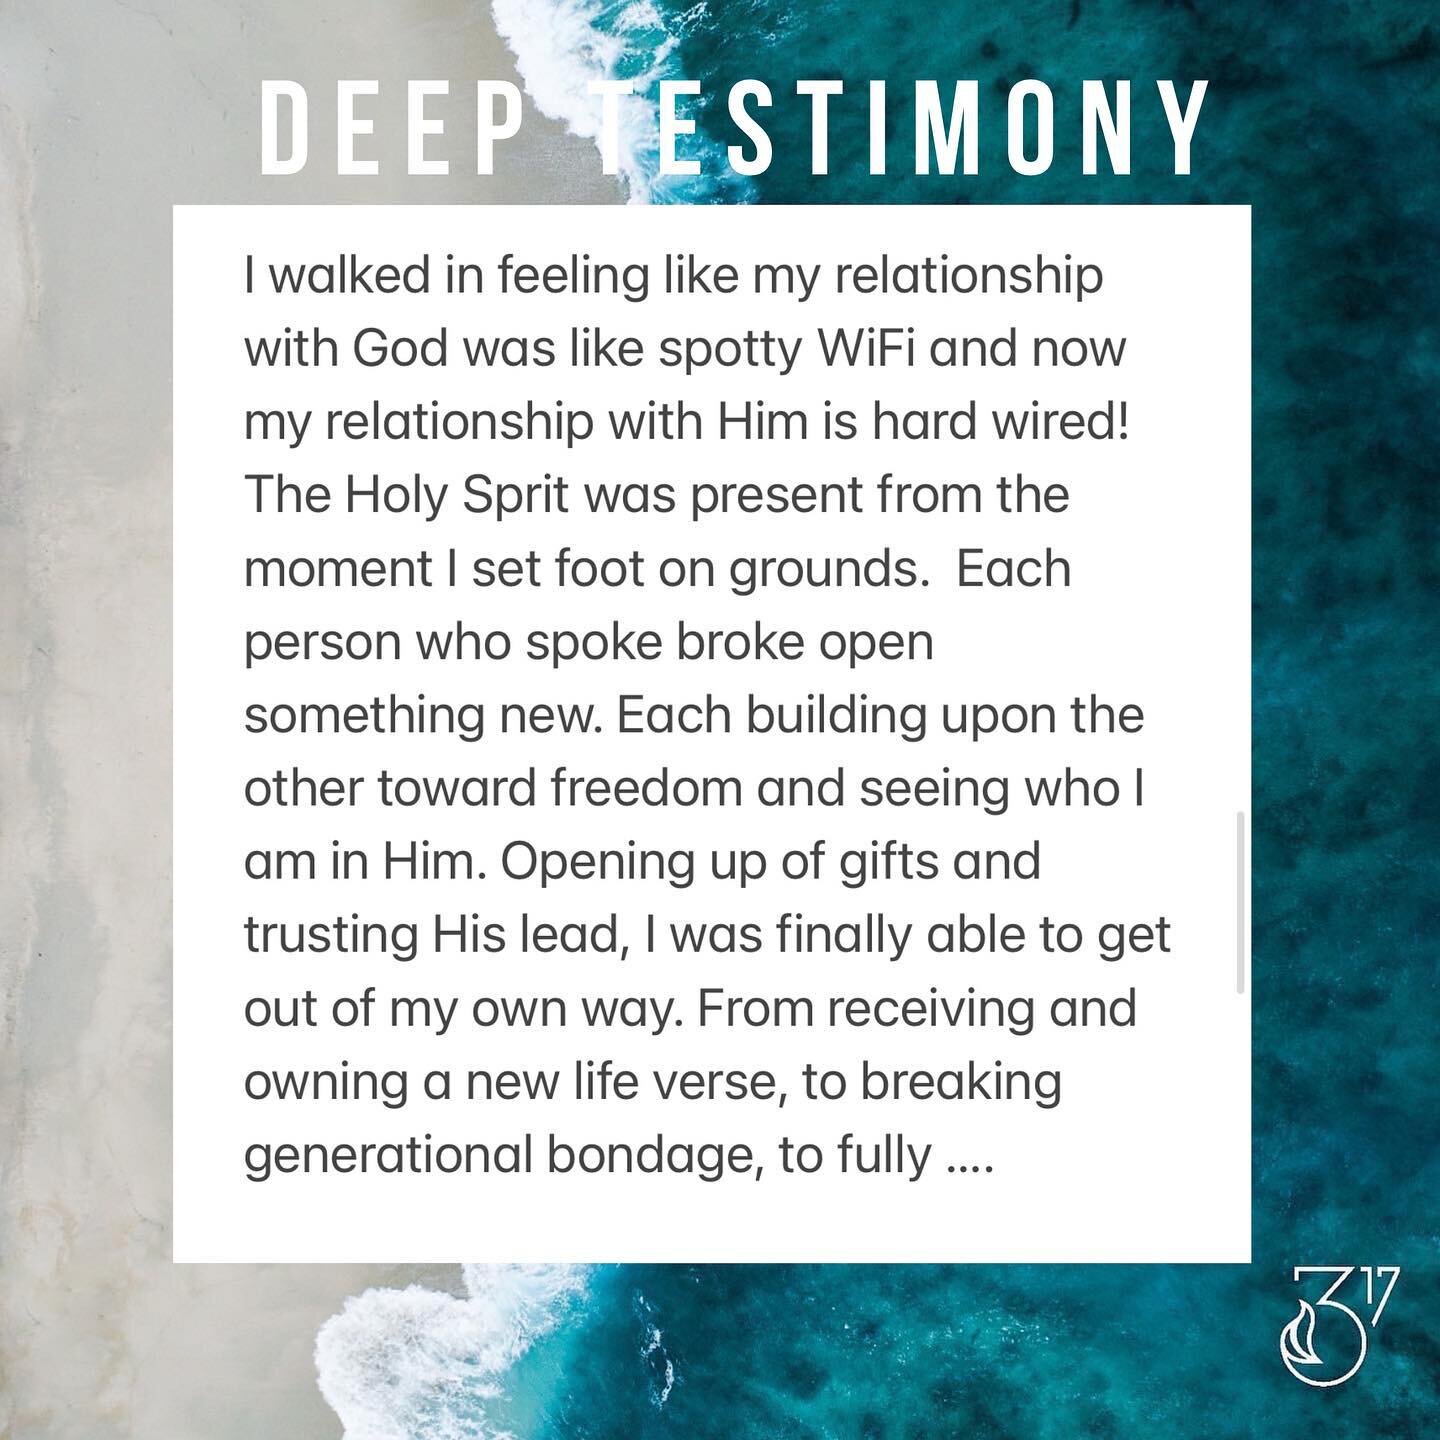 &ldquo;Breaking of chains and belief systems of bondage, His PRESENCE was undeniable. Baptism of the Holy Spirit opened up a gateway to experience His POWER. And these moments have not stopped&hellip;&rdquo; Swipe &amp; READ the rest of what God did 